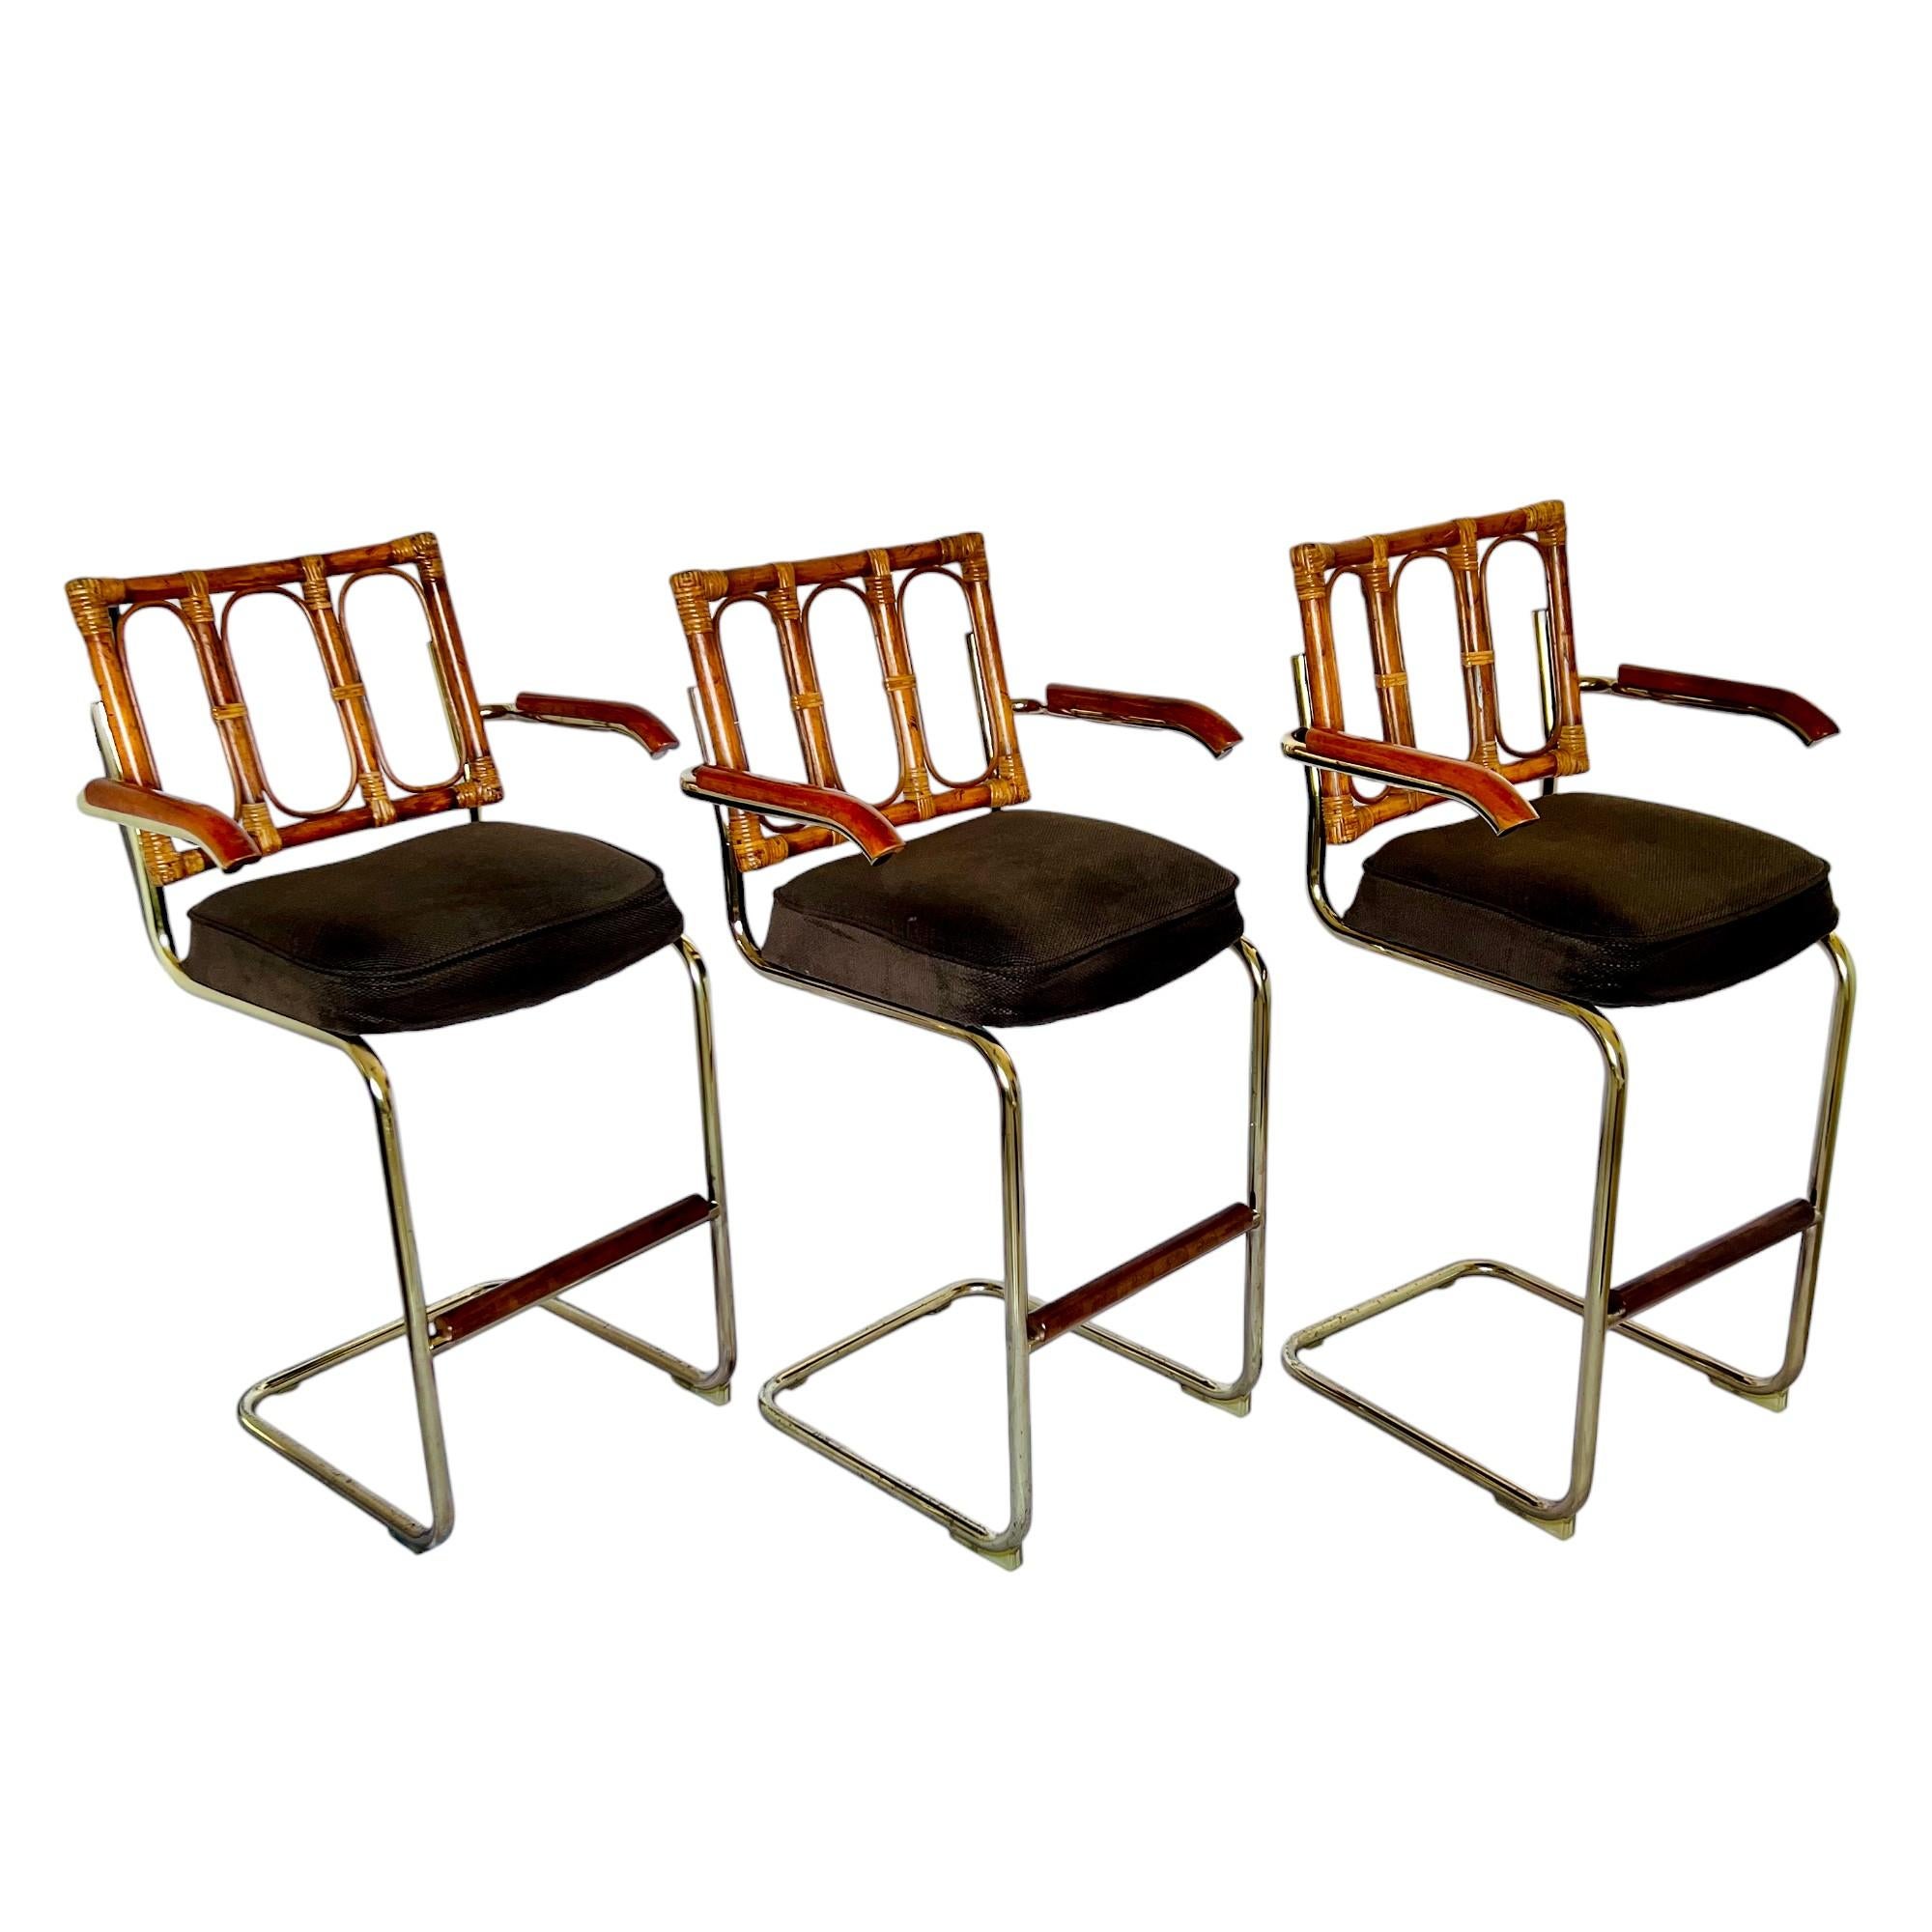 A vintage set of three Marcel Breuer Cesca style rattan and brass bar stools with arms. The mid-century modern design features a tubular brass finish metal frame, rattan back with looped and wrapped details, a thick cushioned seat in a dark brown